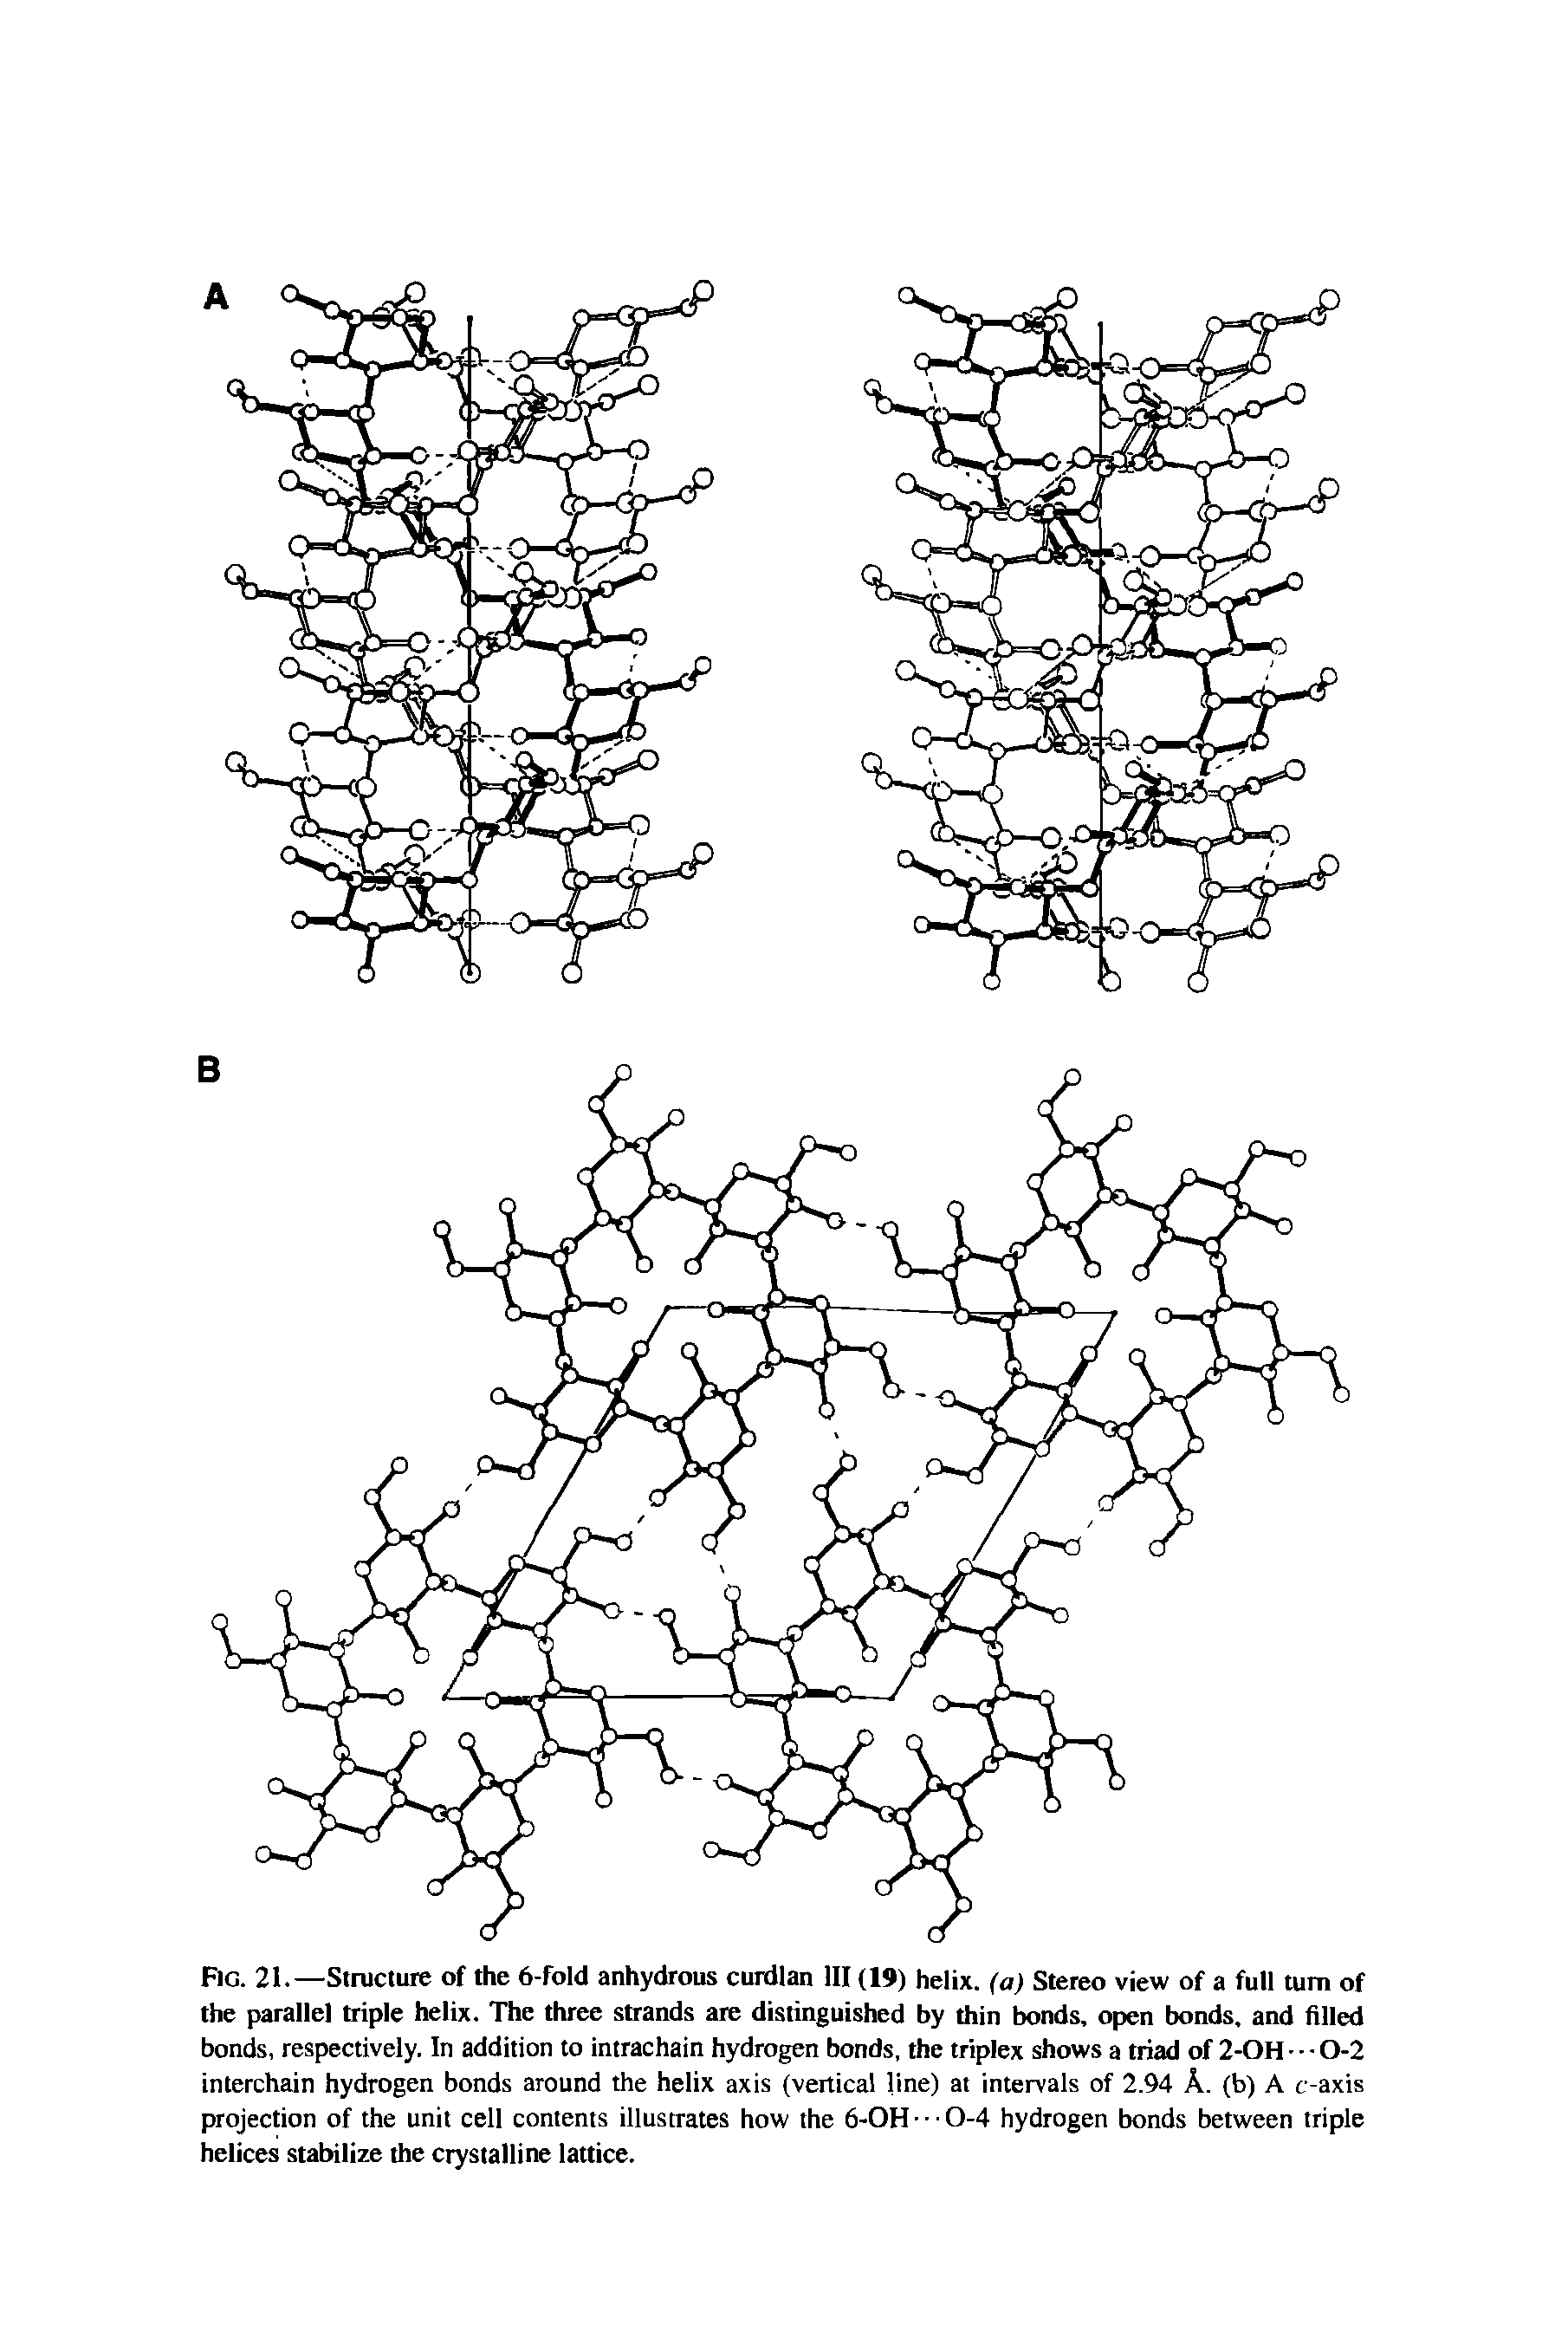 Fig. 21.—Structure of the 6-fold anhydrous curdlan III (19) helix, (a) Stereo view of a full turn of the parallel triple helix. The three strands are distinguished by thin bonds, open bonds, and filled bonds, respectively. In addition to intrachain hydrogen bonds, the triplex shows a triad of 2-OH - 0-2 interchain hydrogen bonds around the helix axis (vertical line) at intervals of 2.94 A. (b) A c-axis projection of the unit cell contents illustrates how the 6-0H - 0-4 hydrogen bonds between triple helices stabilize the crystalline lattice.